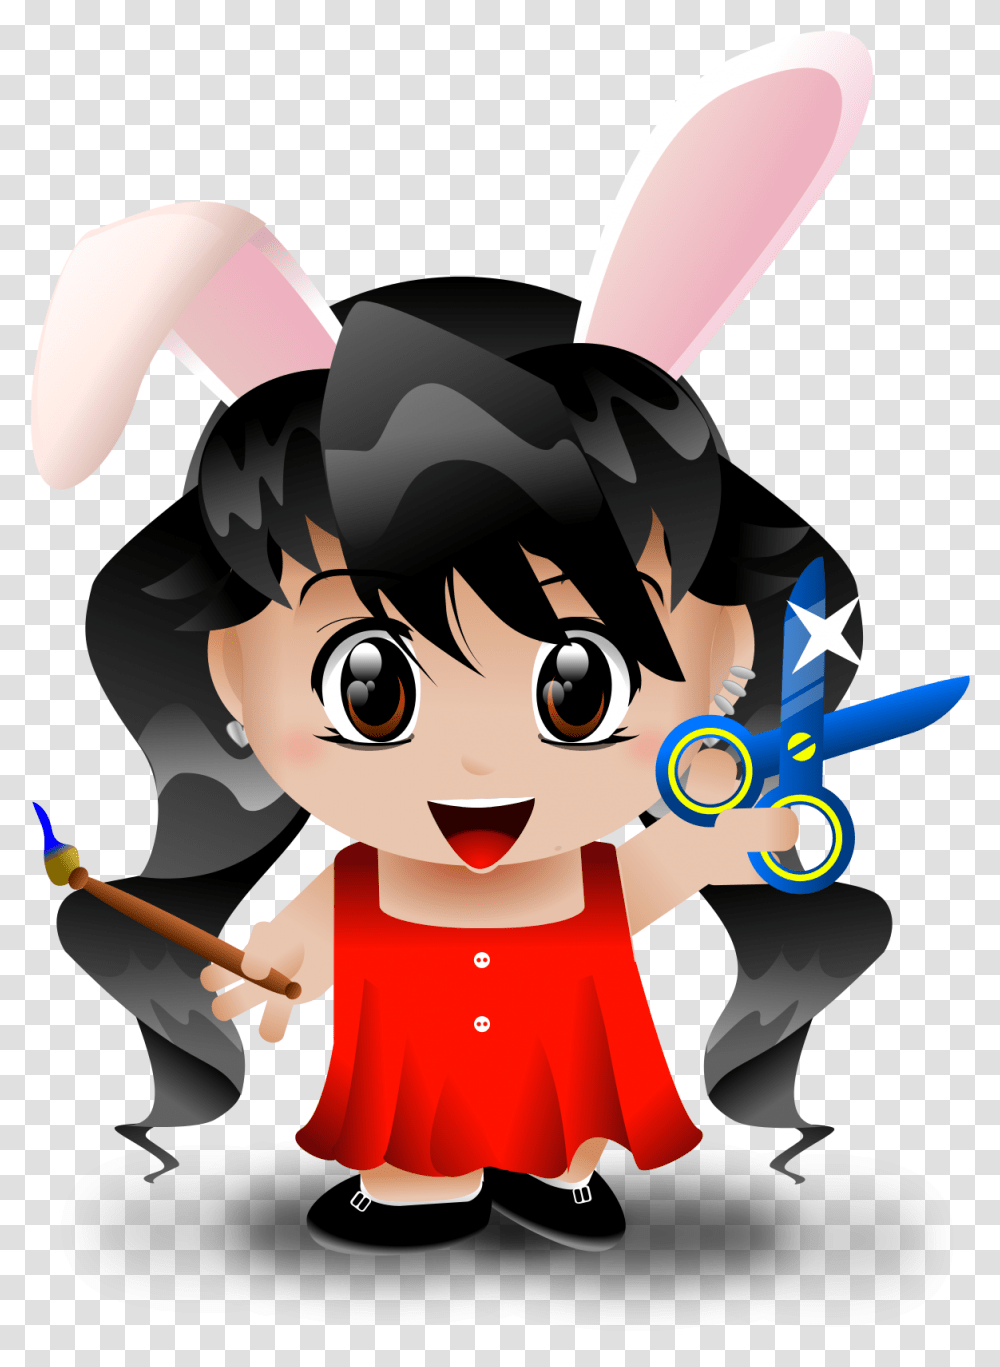 Filewhite Bunnysvg Wikimedia Commons Cat Anime, Toy, Graphics, Art, Outdoors Transparent Png